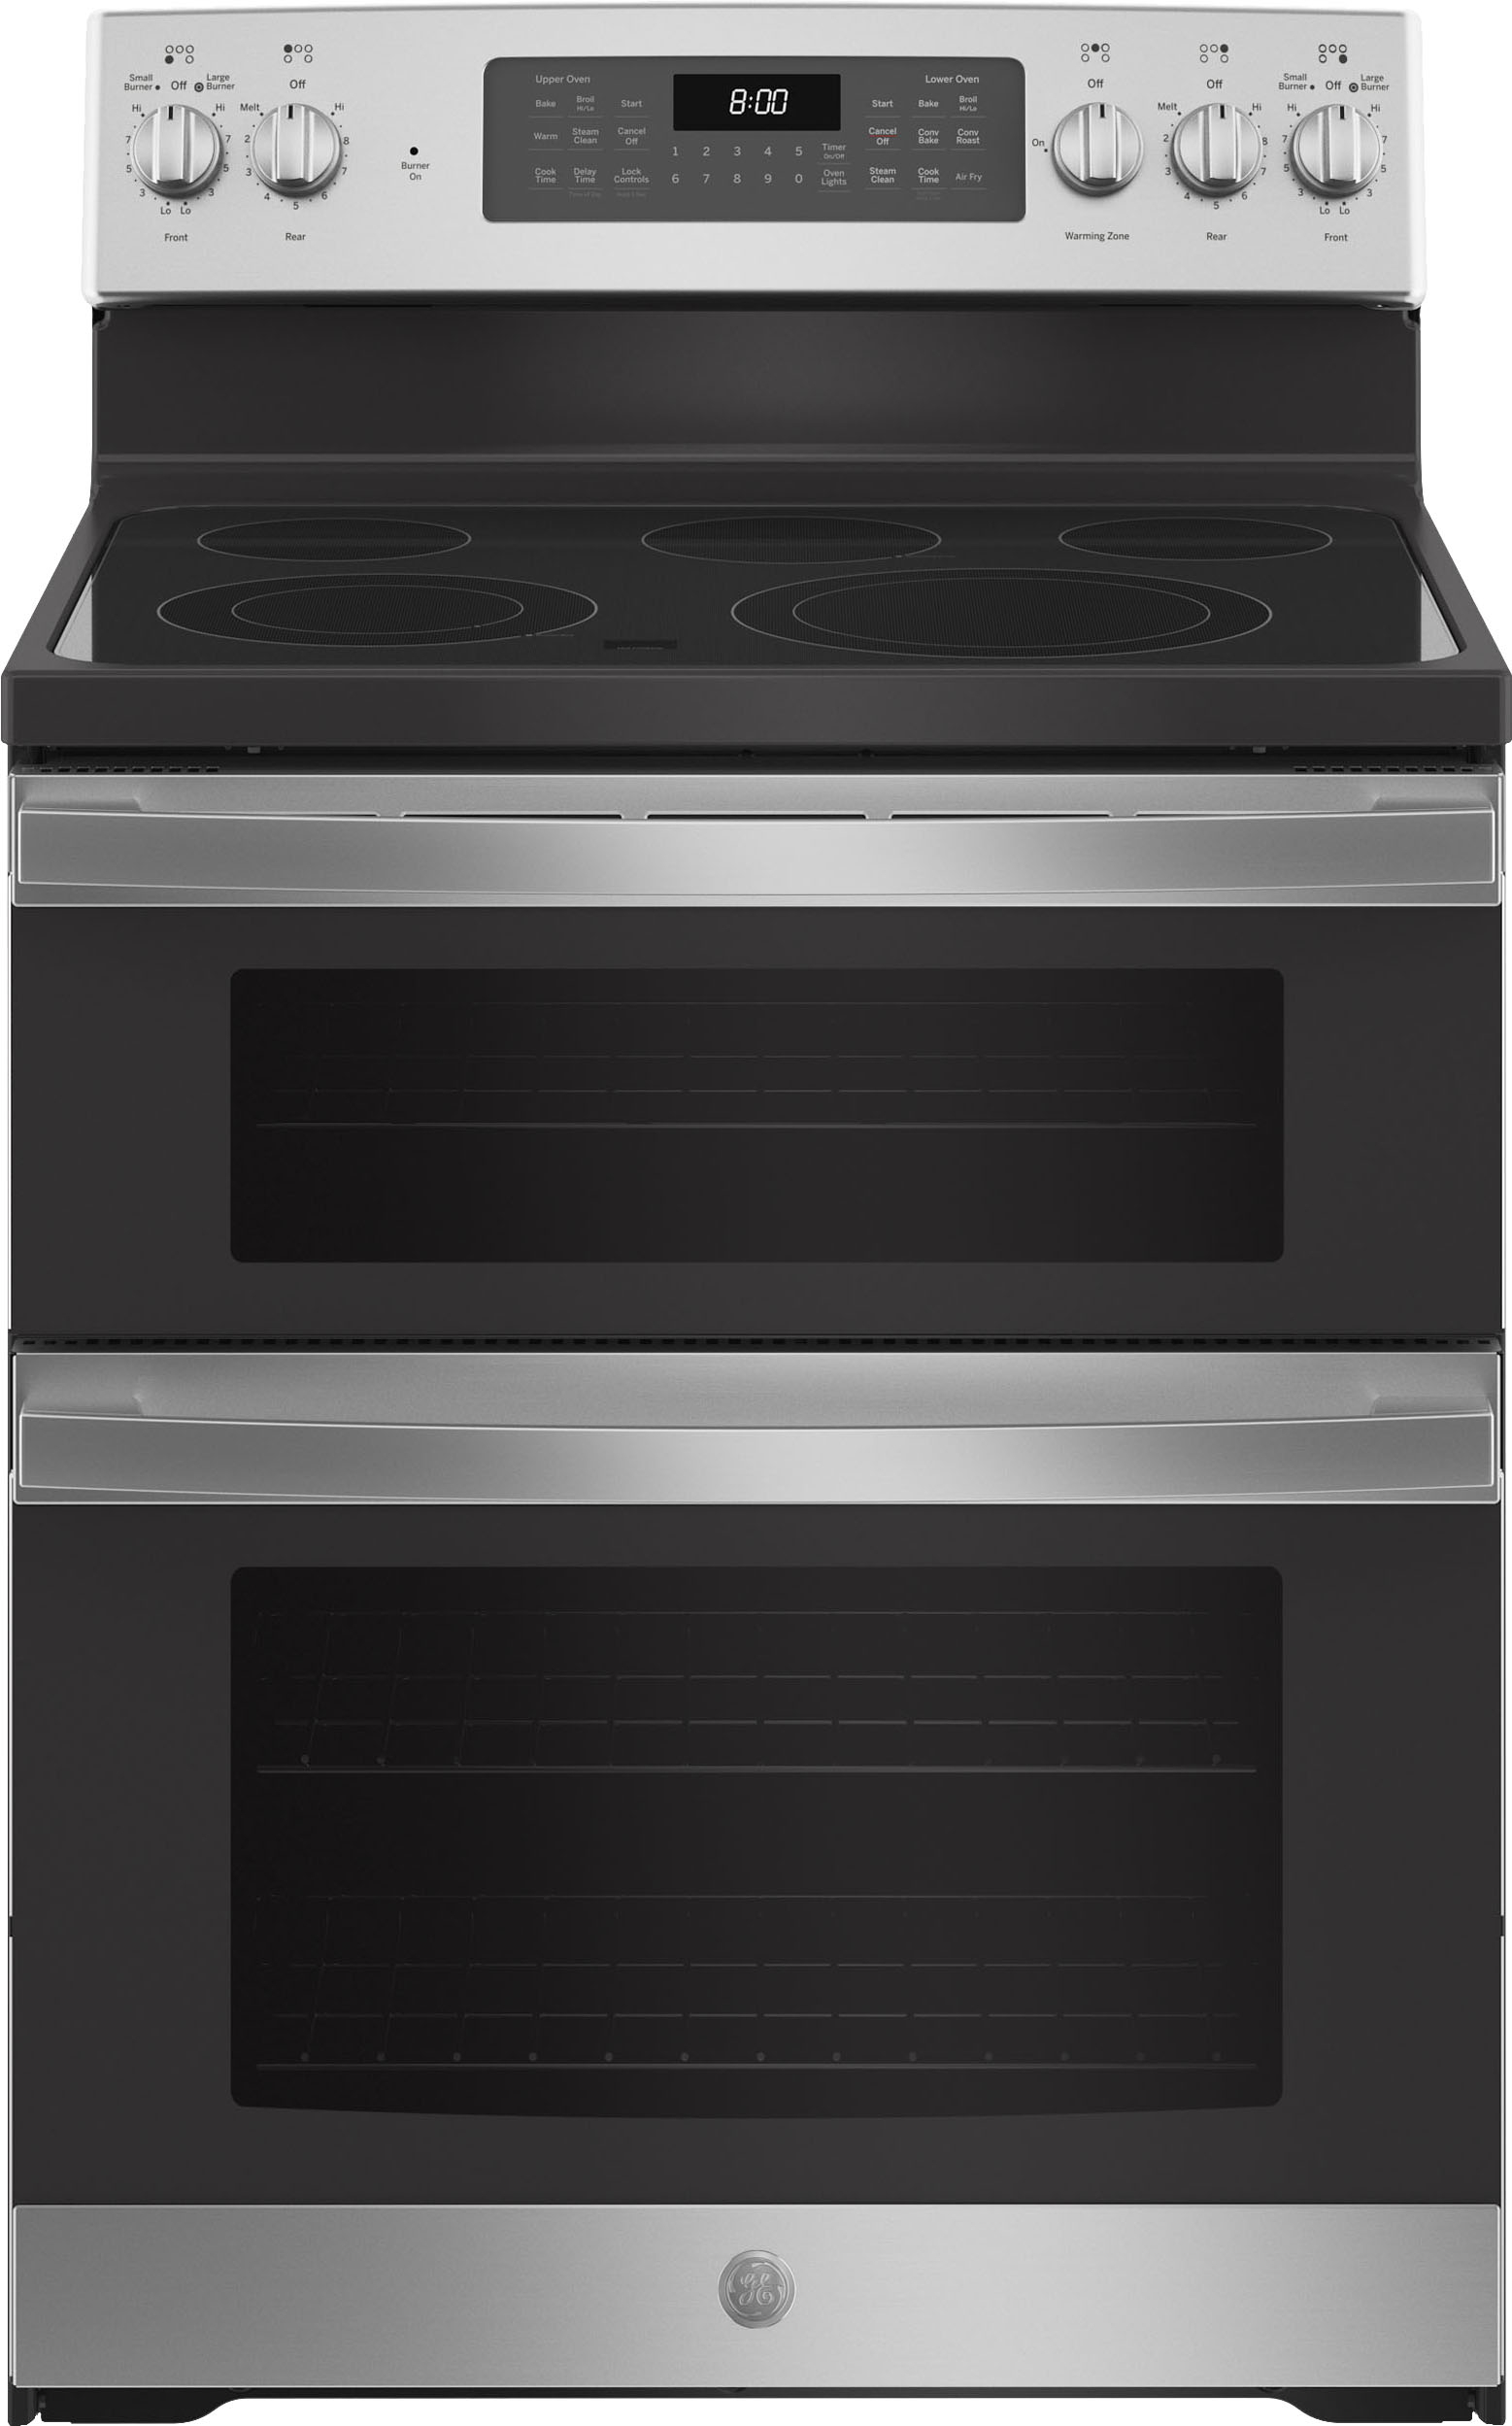 GE – 6.6 Cu. Ft. Freestanding Double Oven Electric Convection Range with Self-Steam Cleaning and No-Preheat Air Fry – Stainless steel